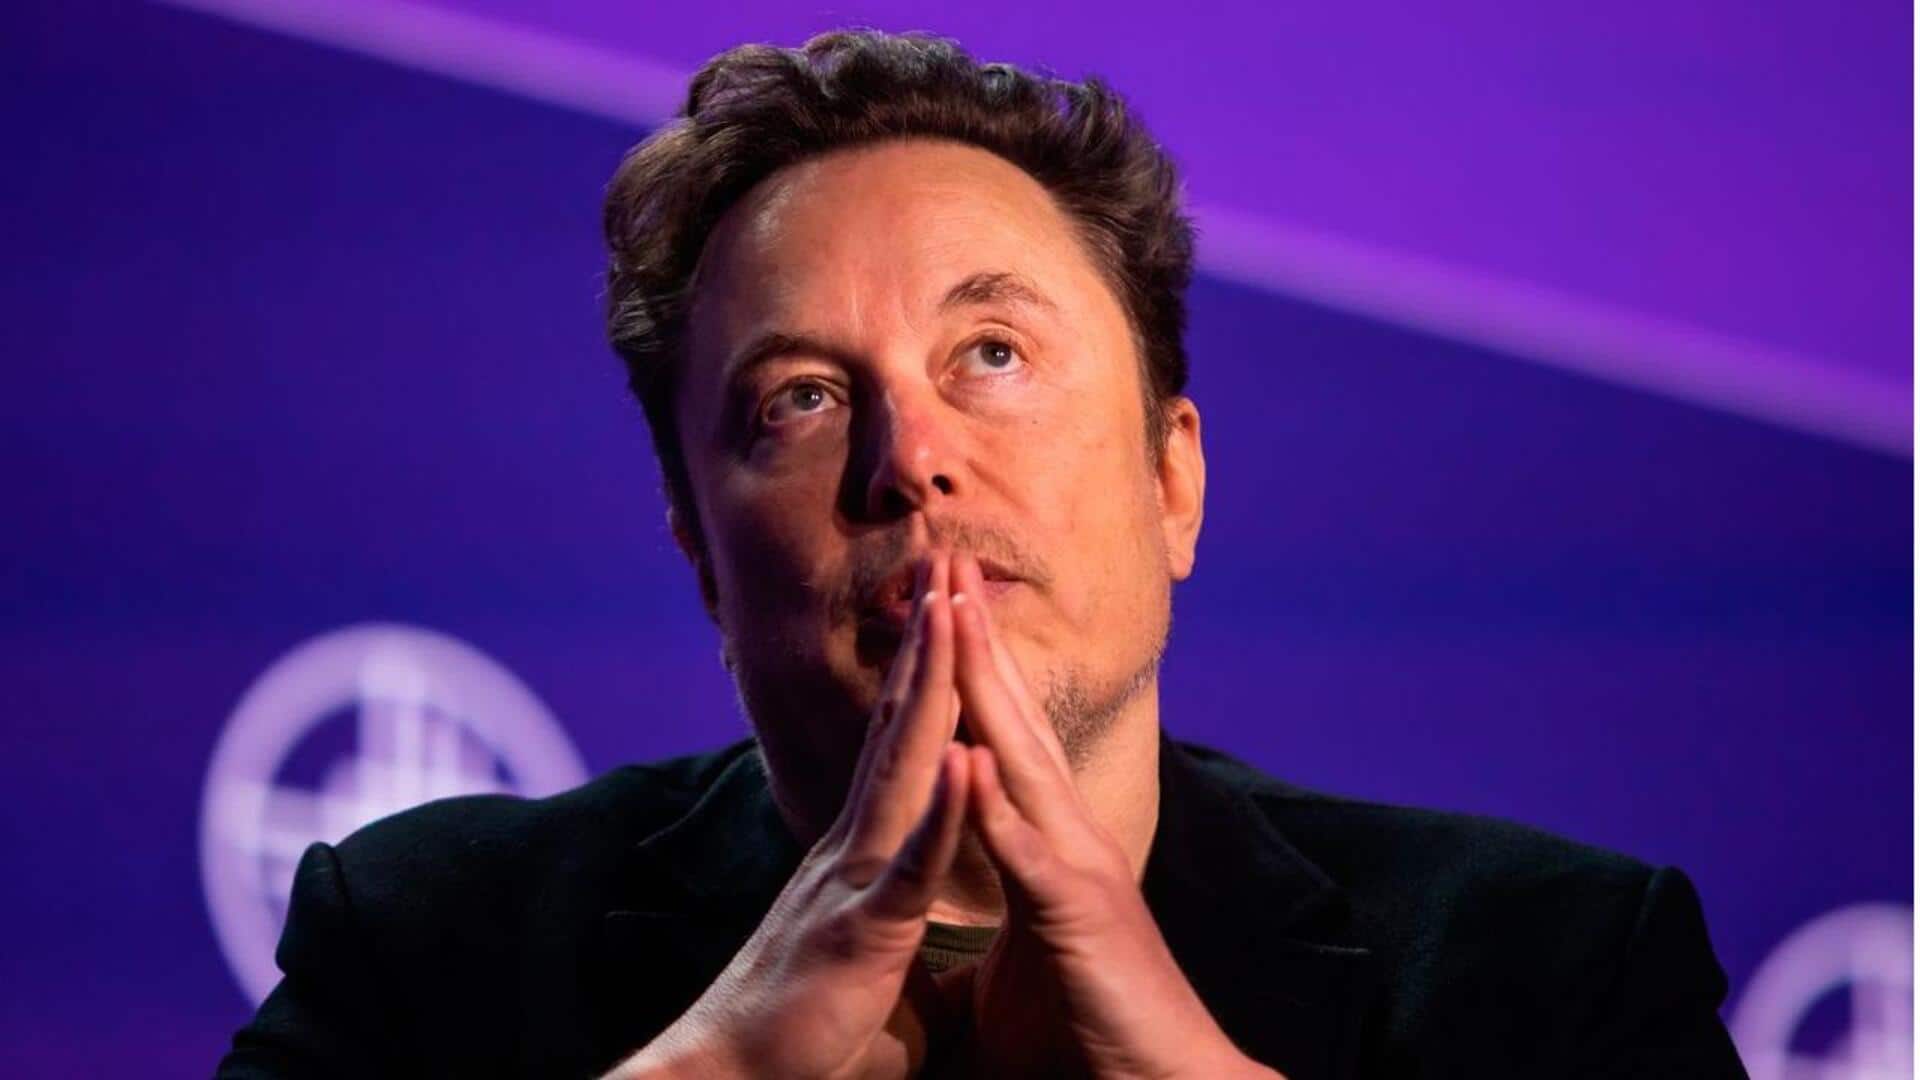 Musk urged SpaceX employee to have his children, says WSJ